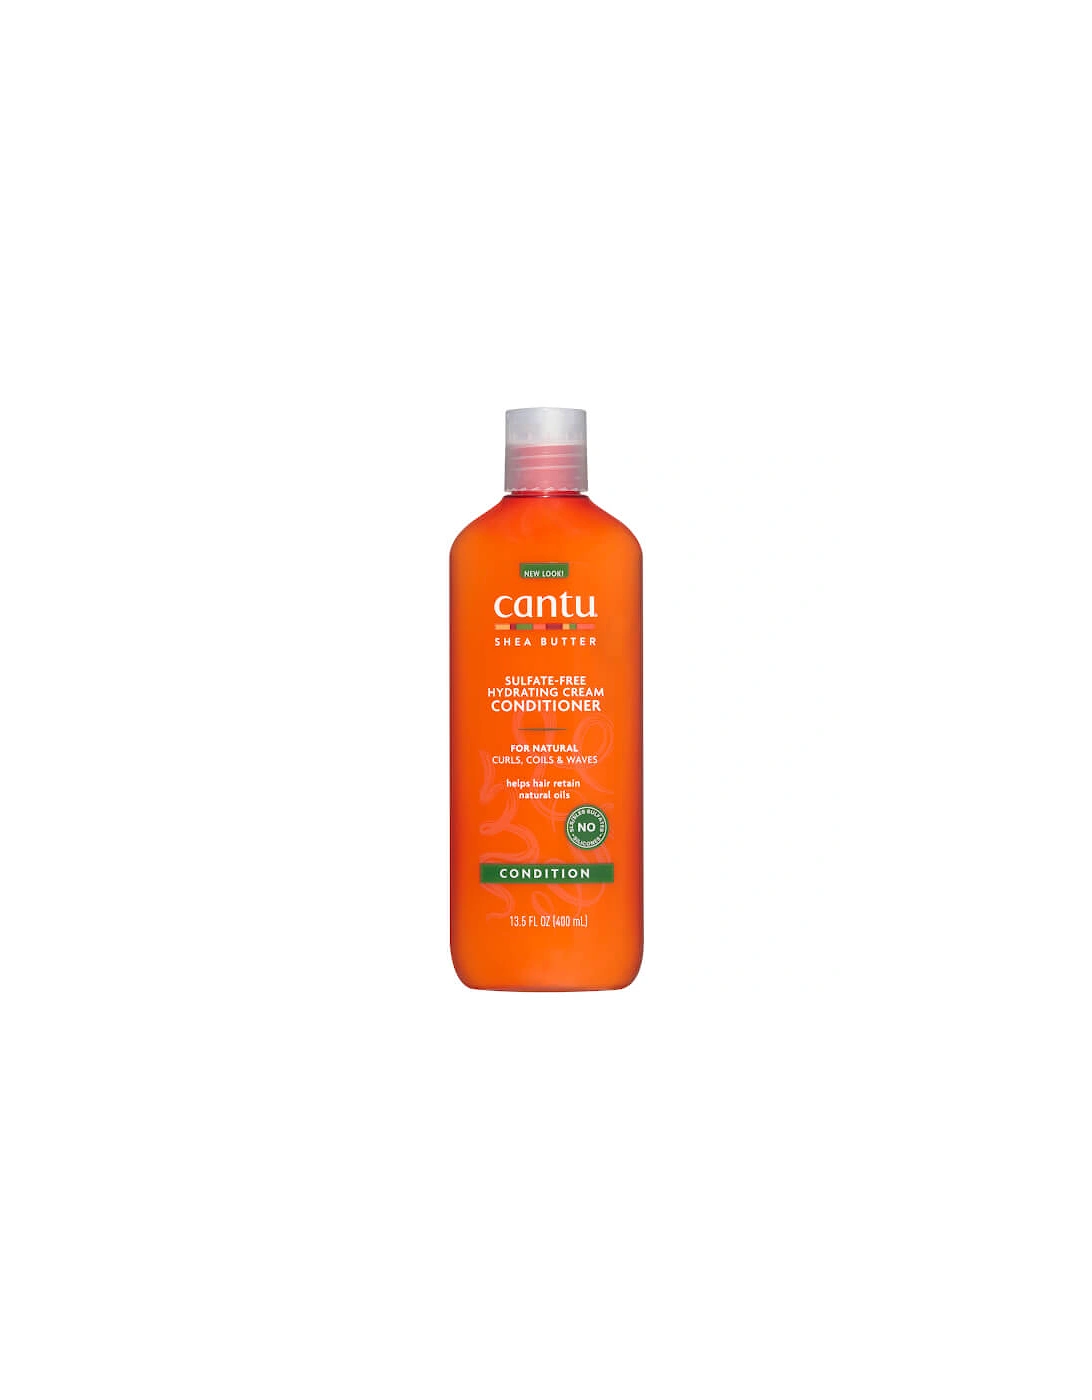 Shea Butter for Natural Hair Sulfate-Free Hydrating Cream Conditioner 400ml - Cantu, 2 of 1